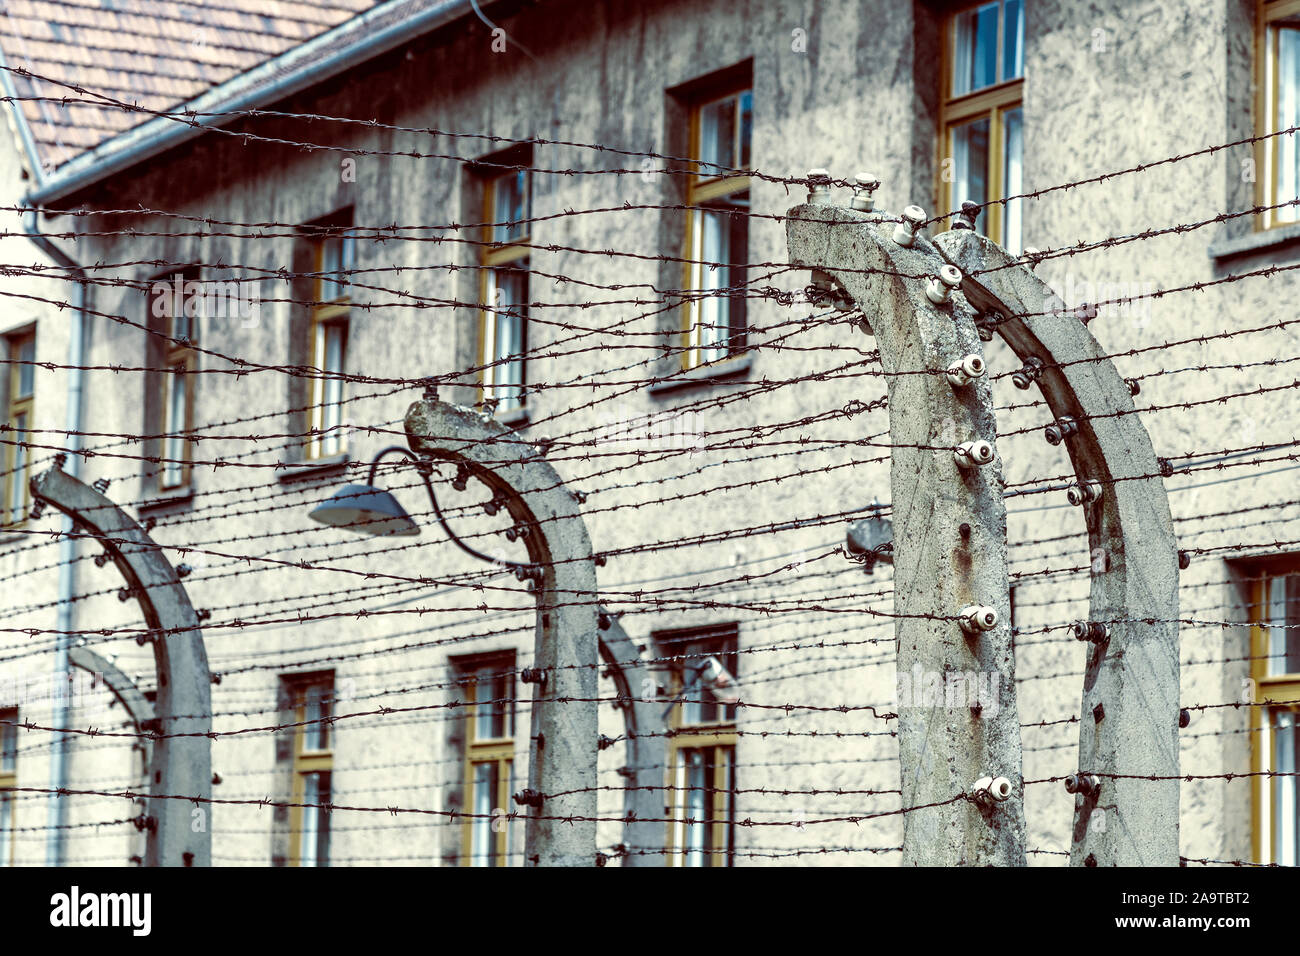 Close-up of barbwire fences for preventing prisoners from escaping at Auschwitz i concentration camp, Poland Stock Photo